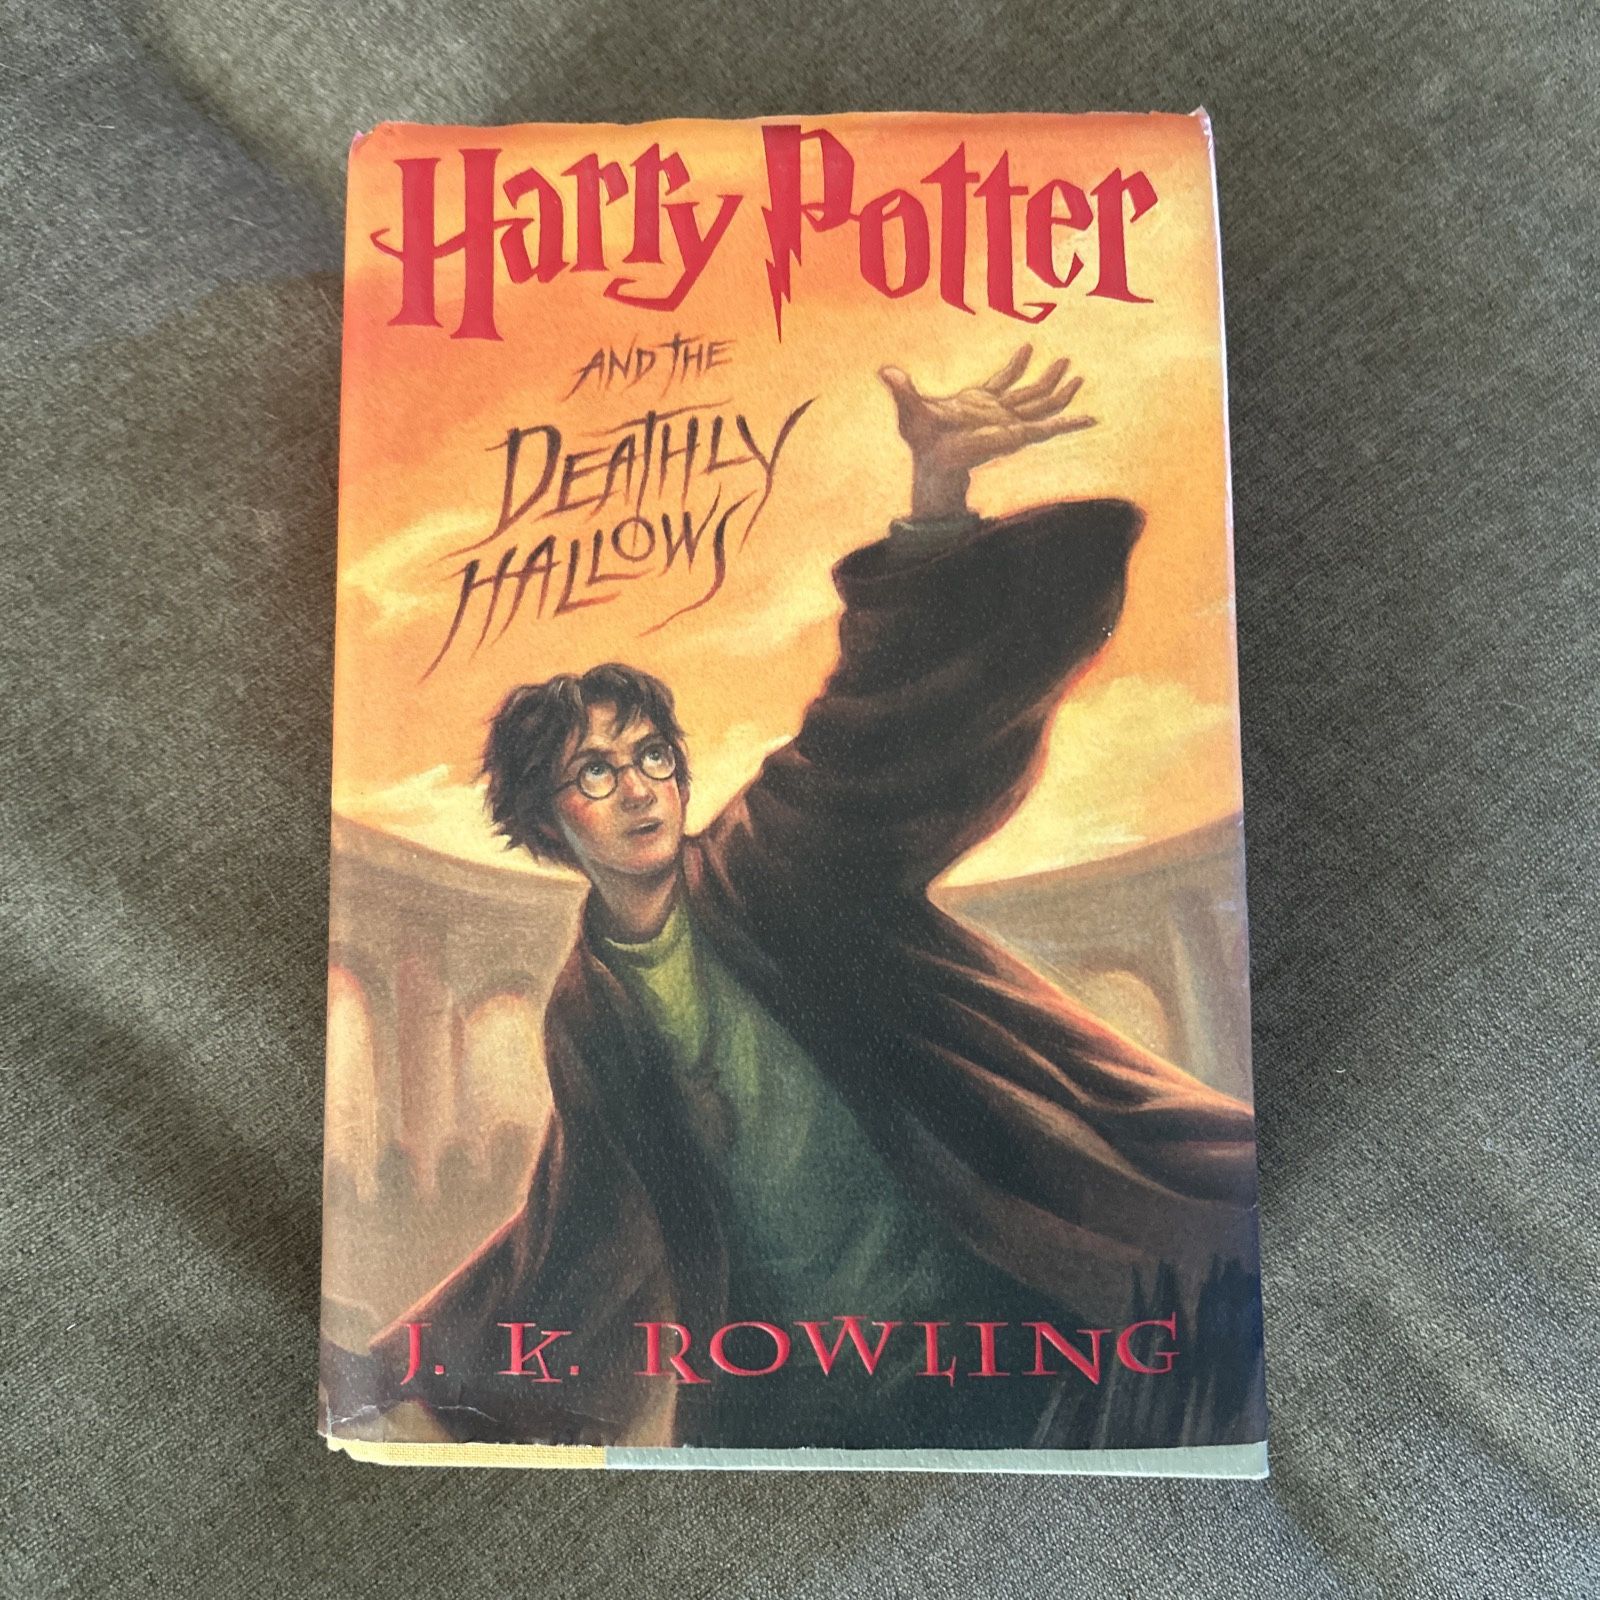 Harry Potter Ser.: Harry Potter and the Deathly Hallows 1st Edition